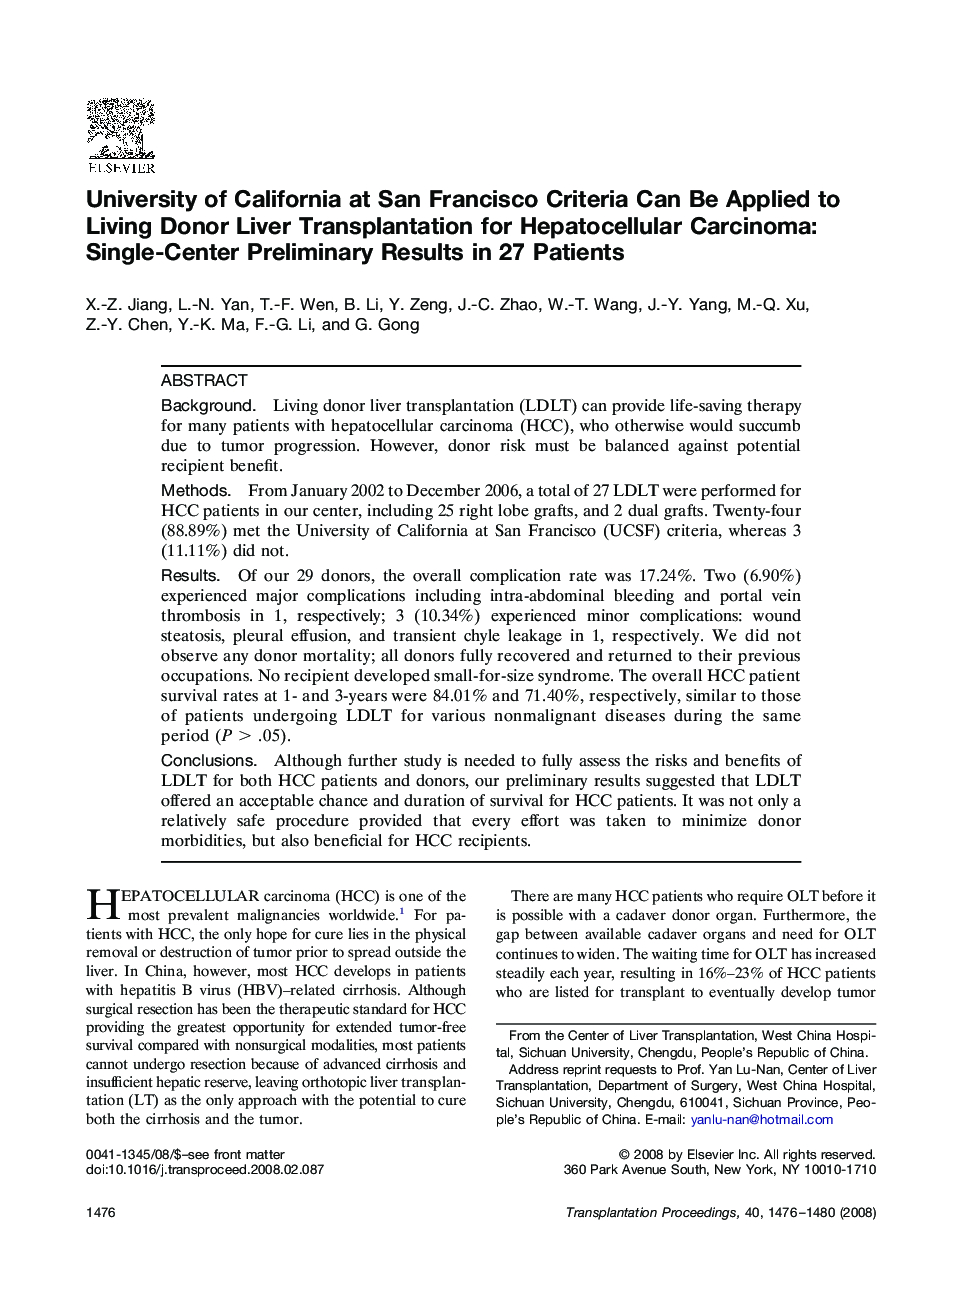 University of California at San Francisco Criteria Can Be Applied to Living Donor Liver Transplantation for Hepatocellular Carcinoma: Single-Center Preliminary Results in 27 Patients